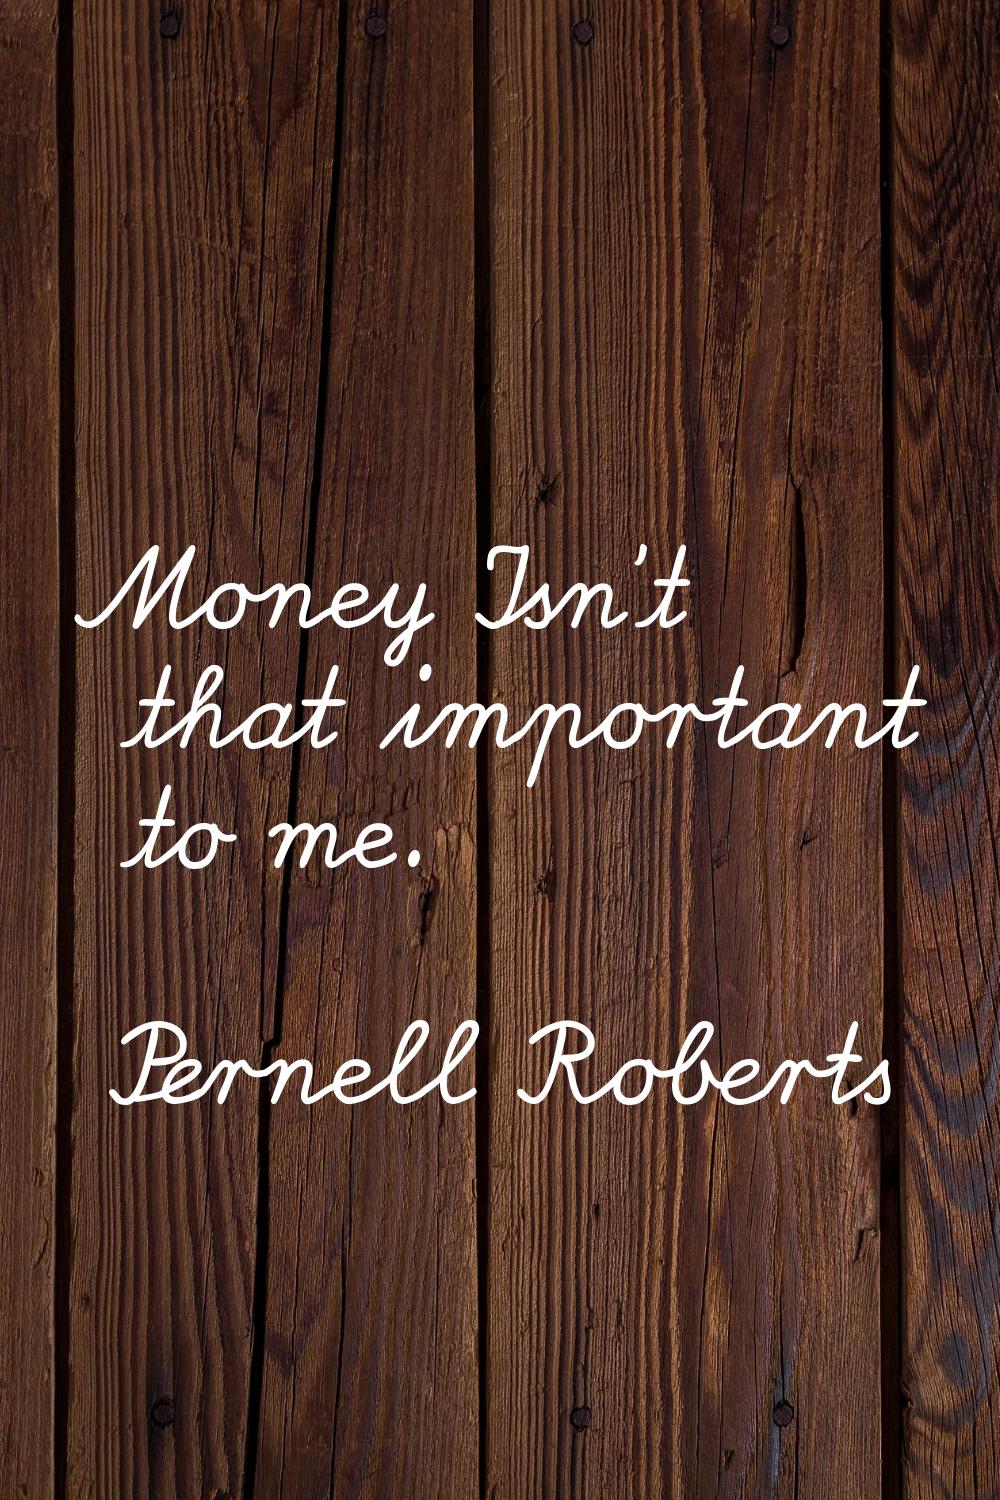 Money Isn't that important to me.